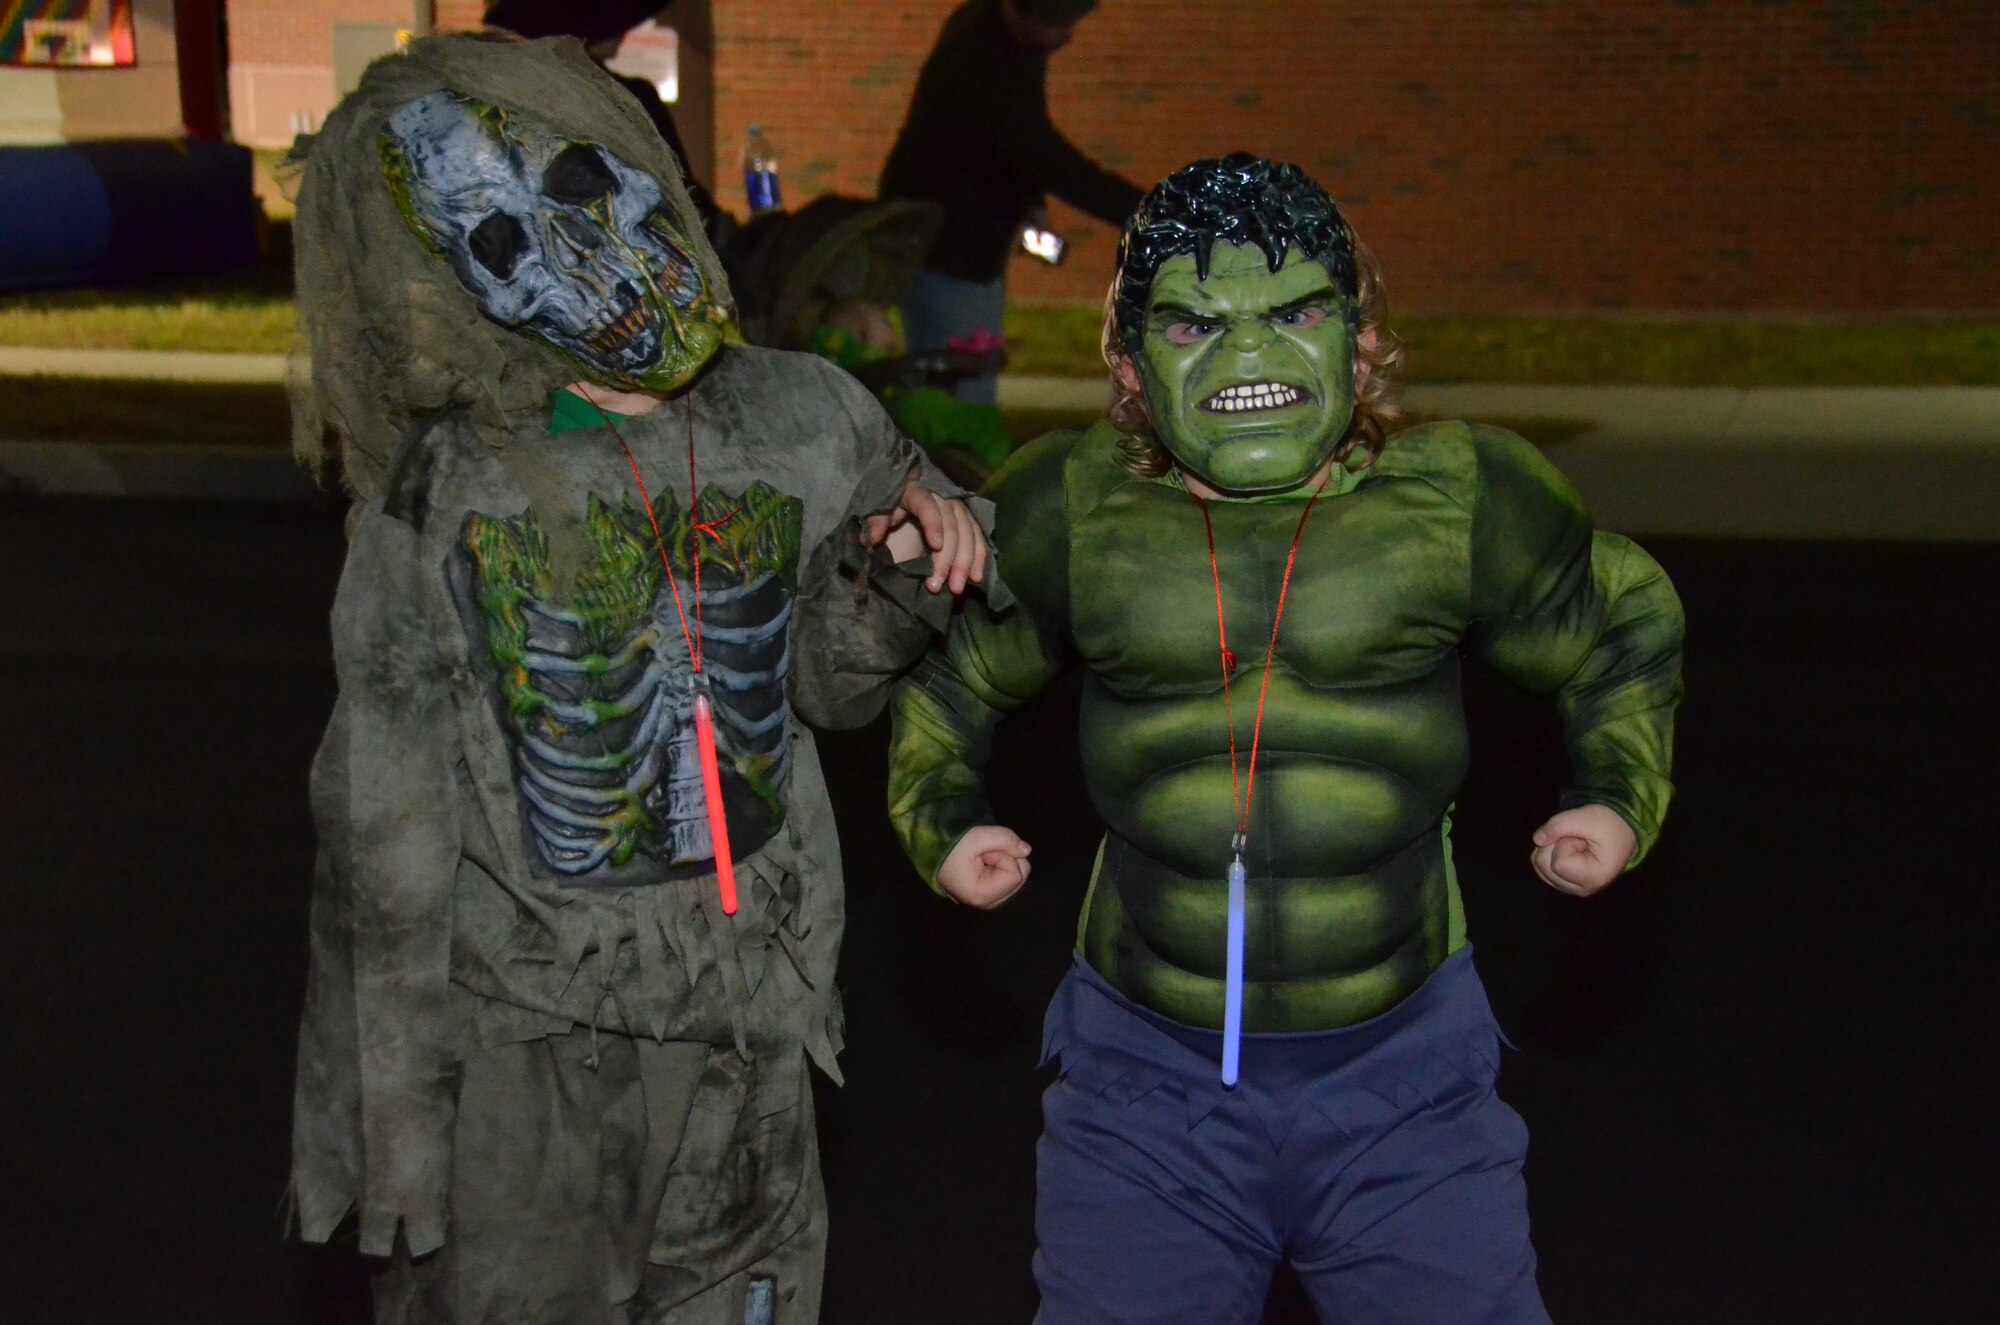 The “hulk” and grotesque zombie, who are actually Tyeler, 8, and Codey, 5, children of Master Sgt. Rose Wilson from the 103rd Logistics Readiness Squadron, show off their Halloween moves during the Child and Youth Program’s Trunk or Treat event held at Bradley Air National Guard Base, East Granby, Conn., Oct. 28, 2014. The event drew a variety of Halloween characters to trick or treat from various car trunks decorated in the Halloween fashion. (U.S. Air National Guard photo by Tech. Sgt. Joshua Mead)